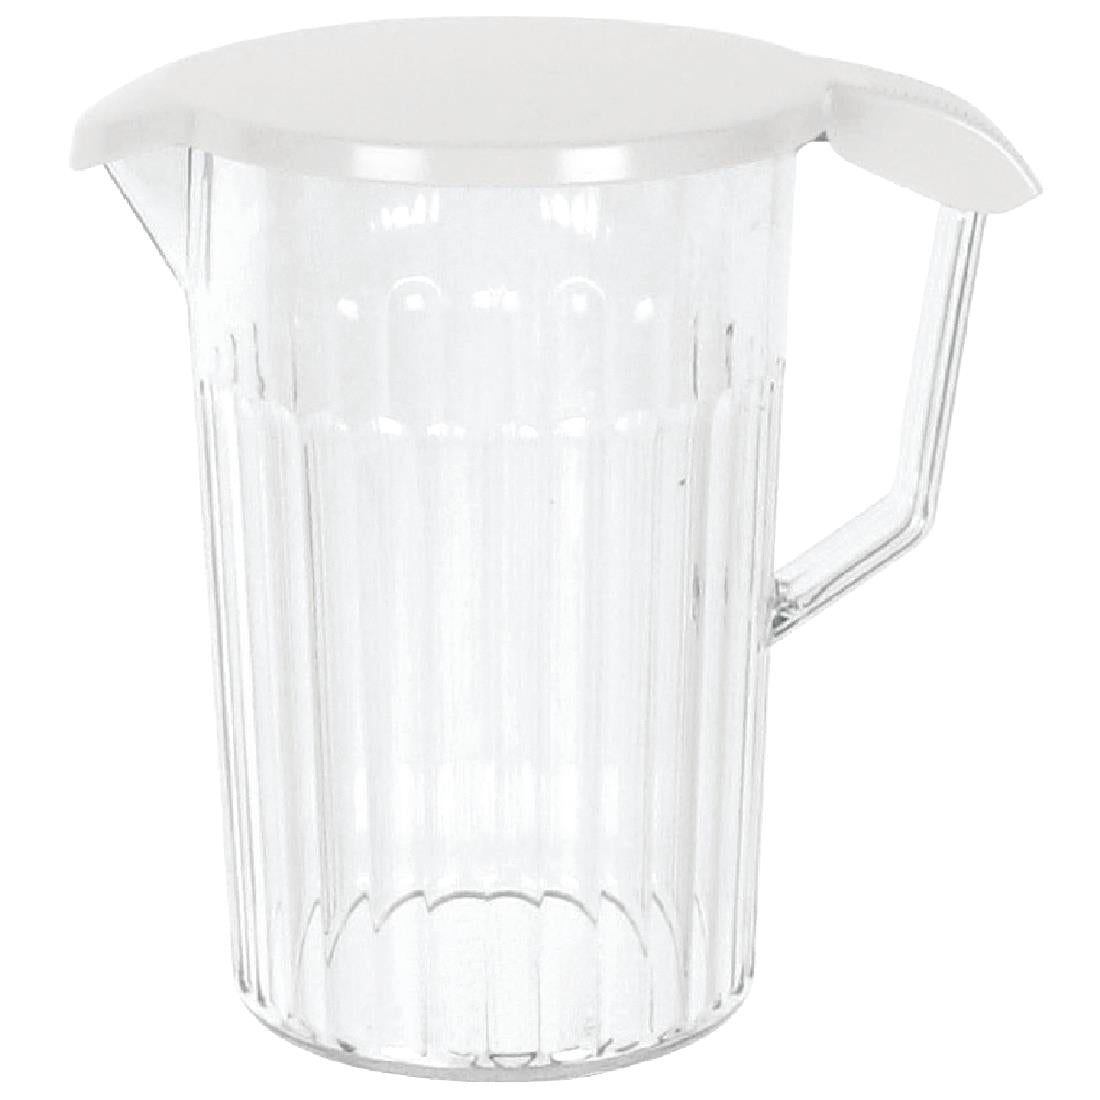 Olympia Kristallon White Polycarbonate Lid for 1.4Ltr Jug